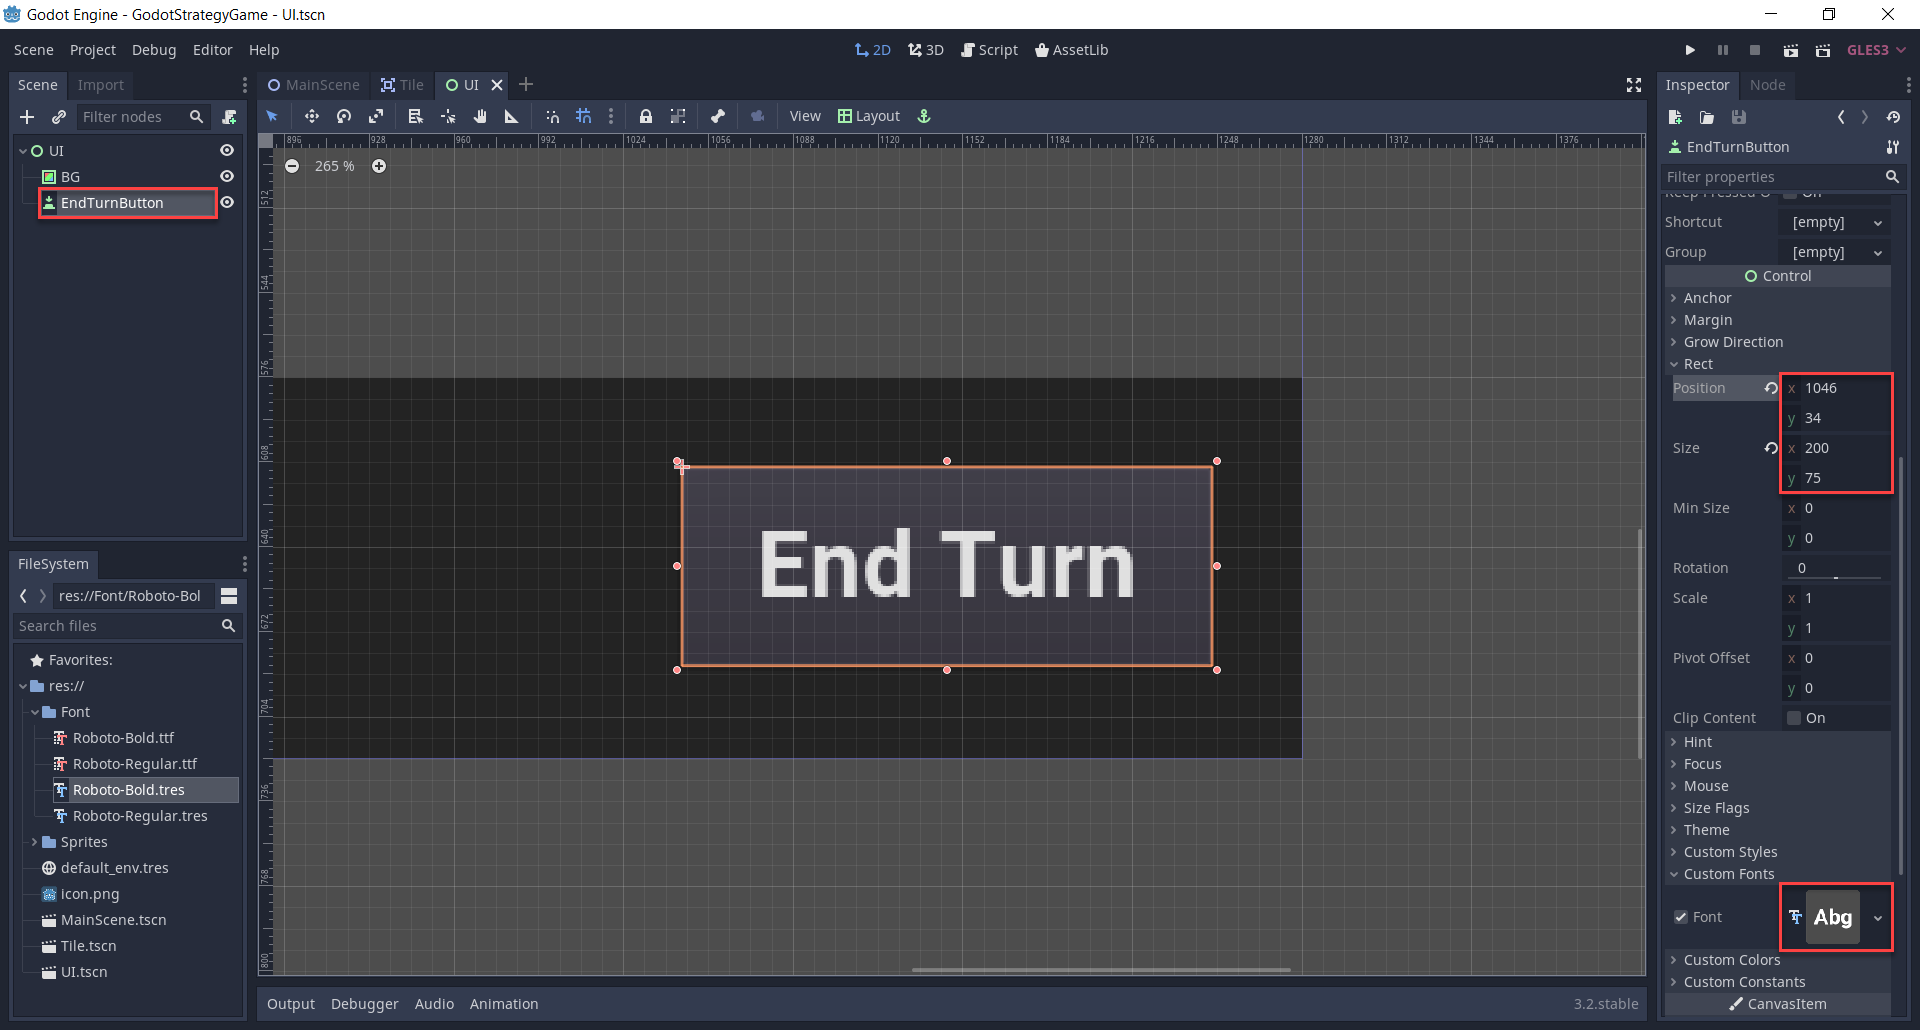 Creating the end turn button.